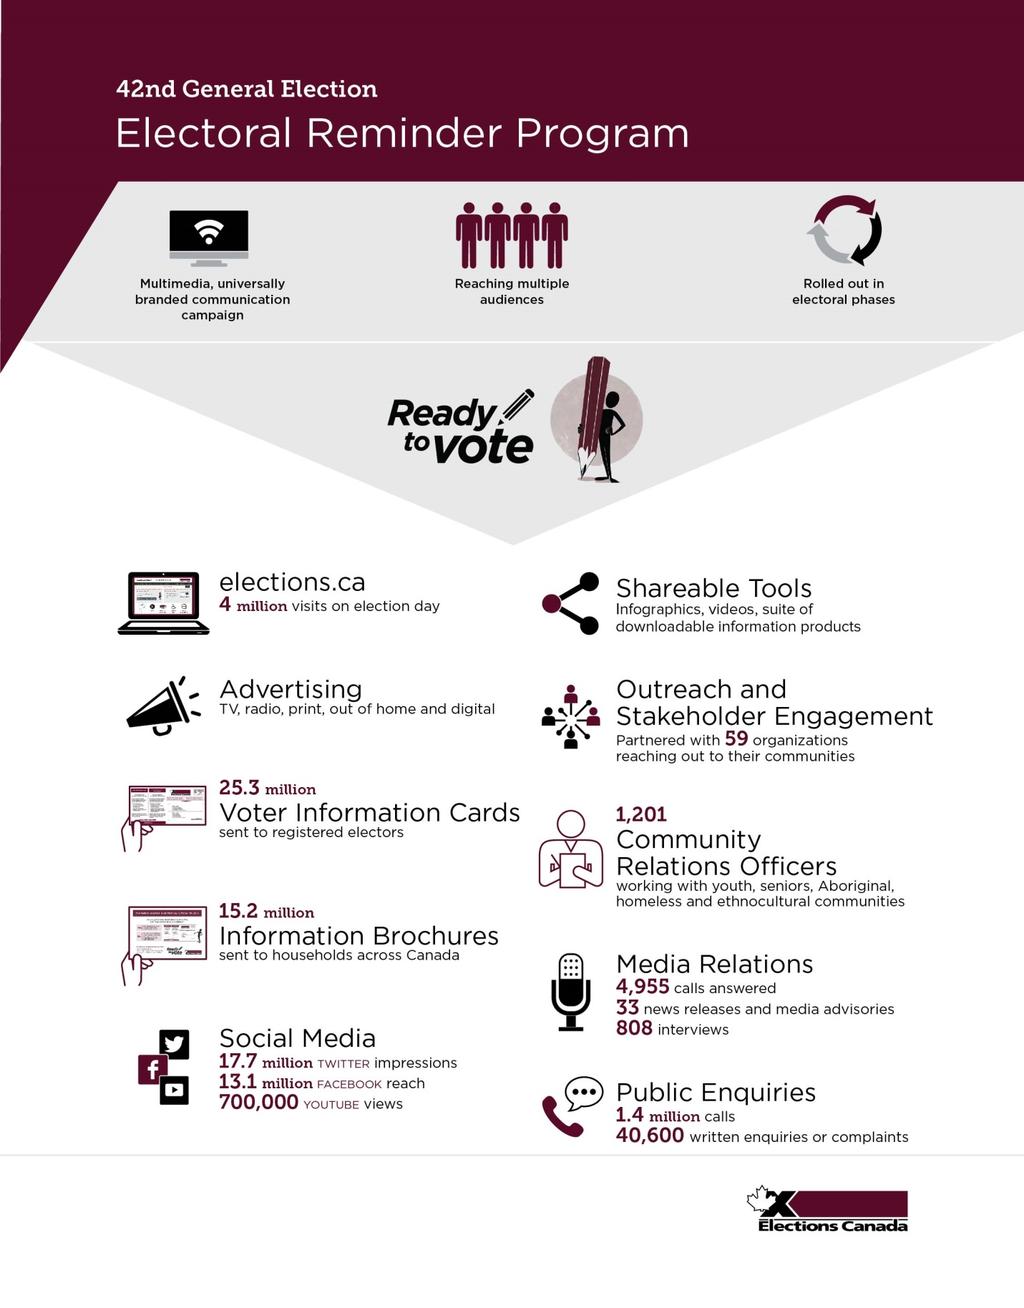 Infographic on the Electoral Reminder Program for the 42nd